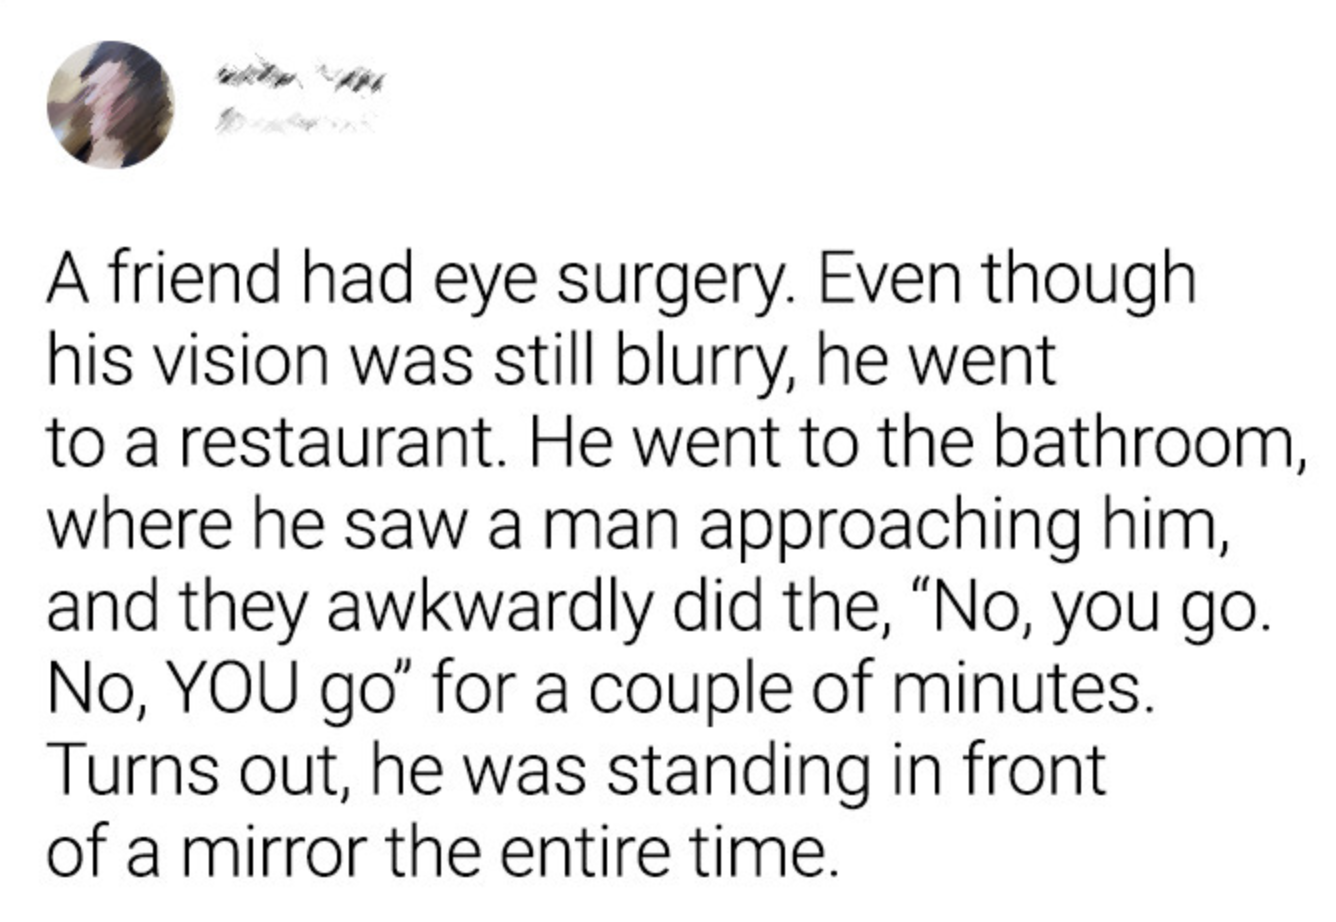 Text from an Internet post about a person with blurry vision mistakenly having an awkward exchange with a mirror in a restaurant restroom